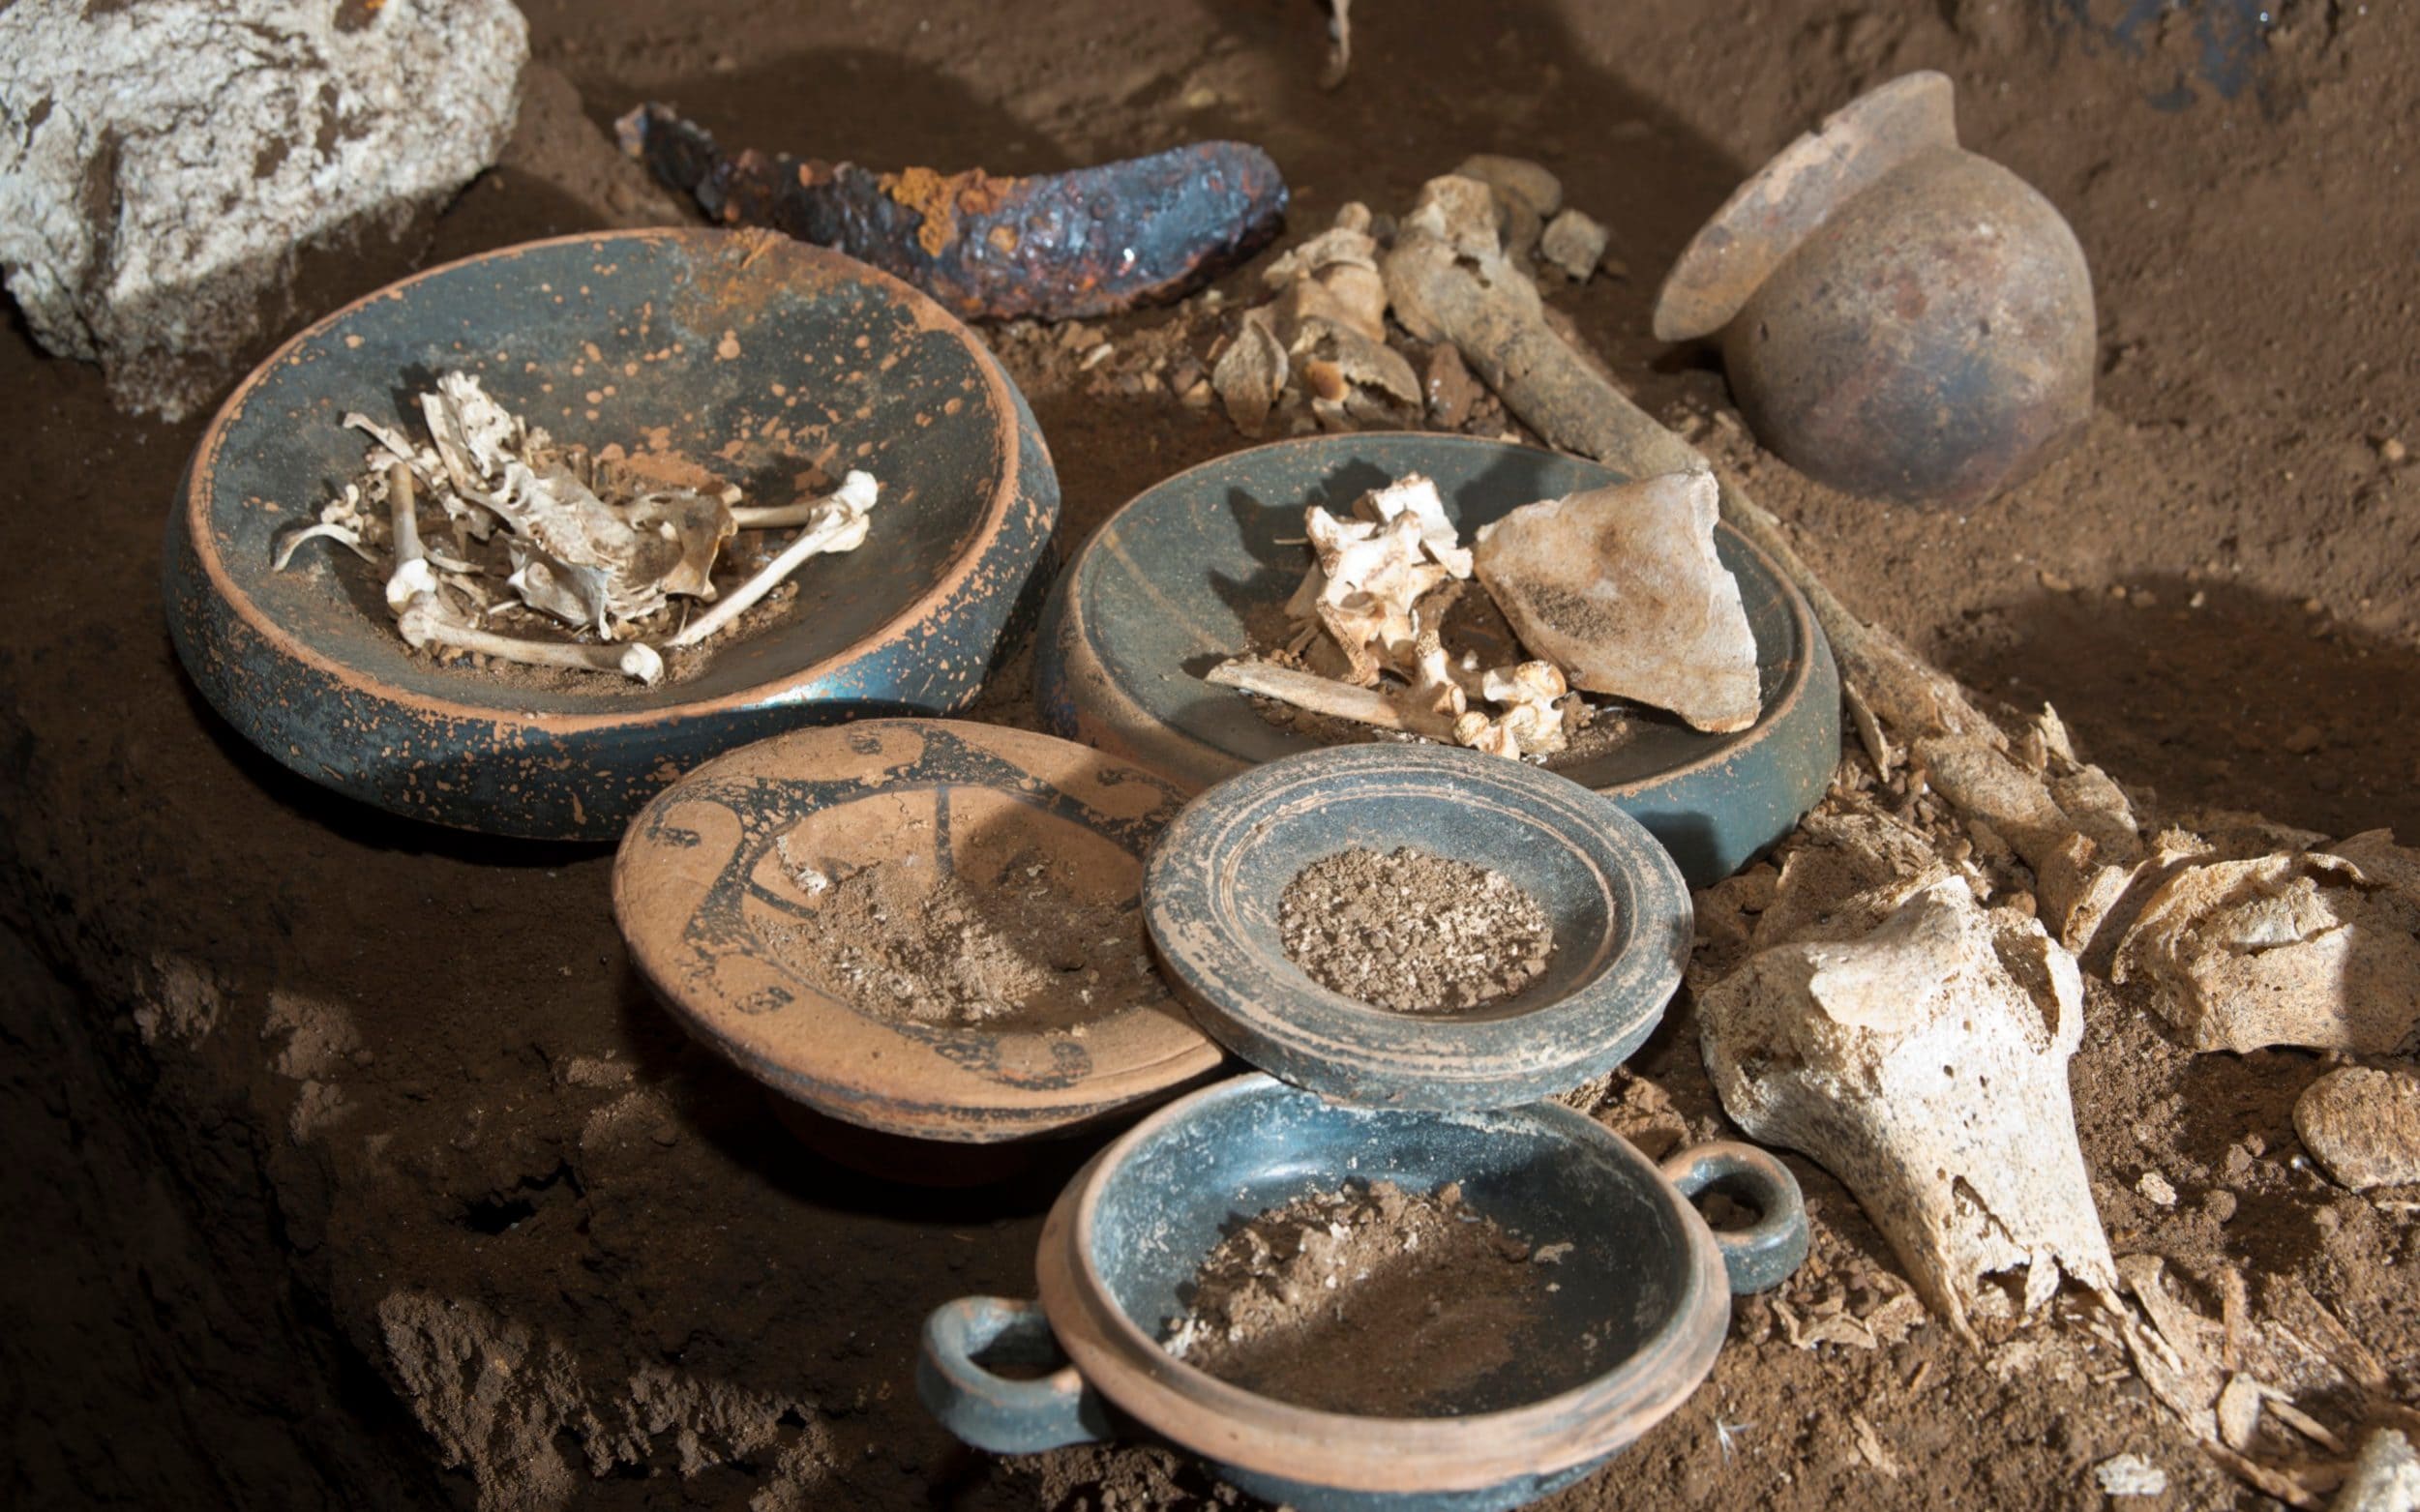 Funerary goods found in tomb